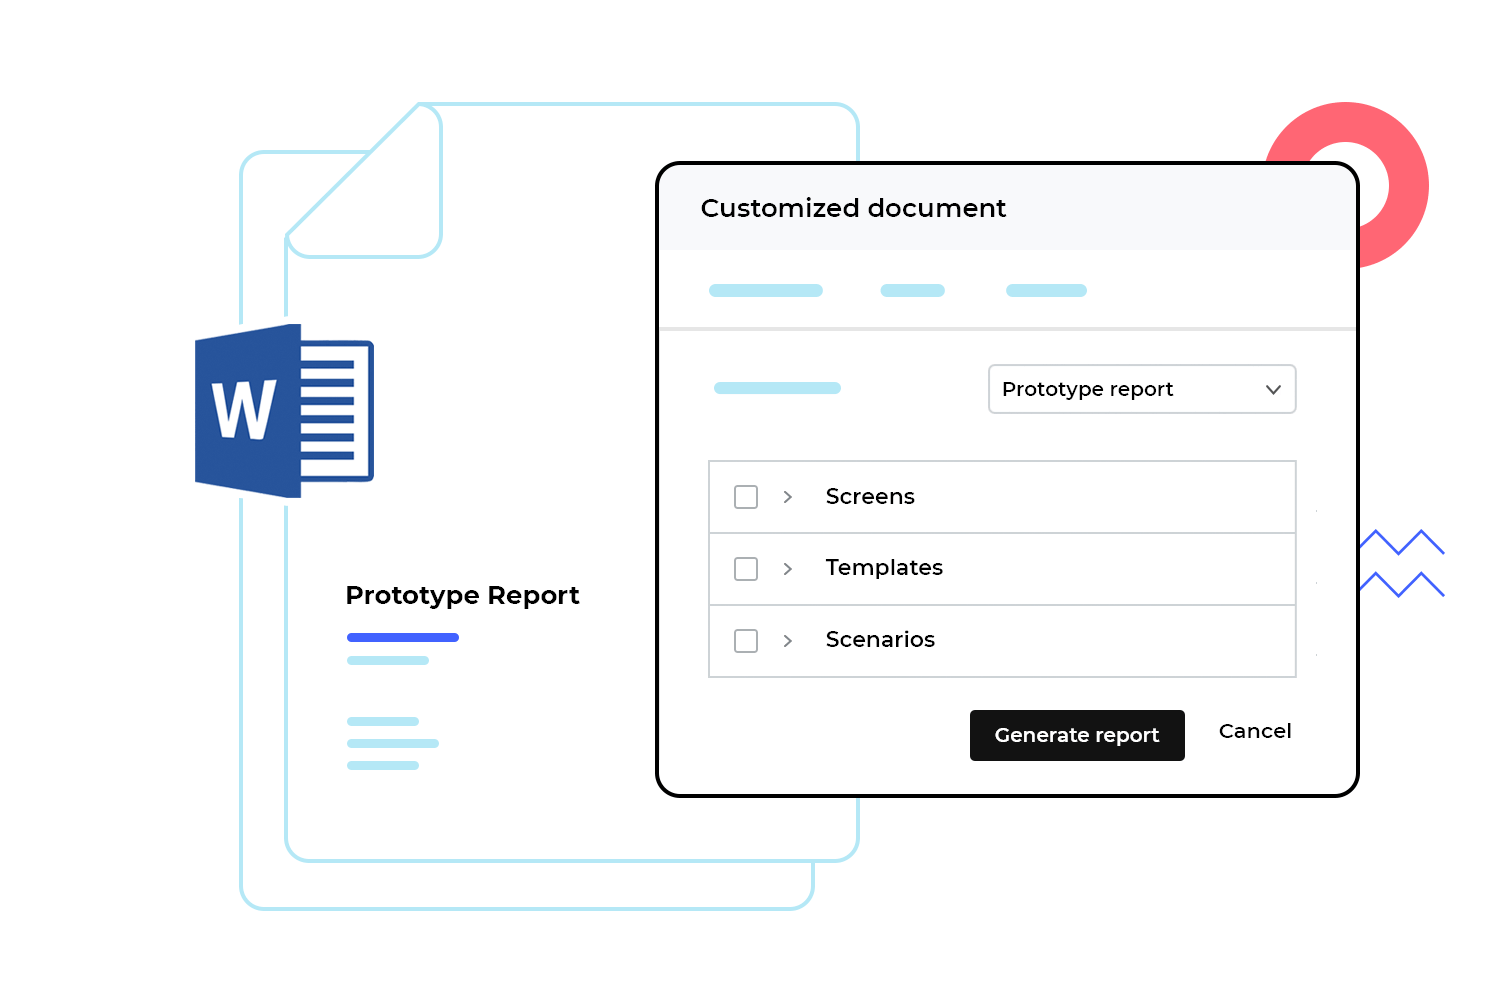 Generate UI and functional requirements document